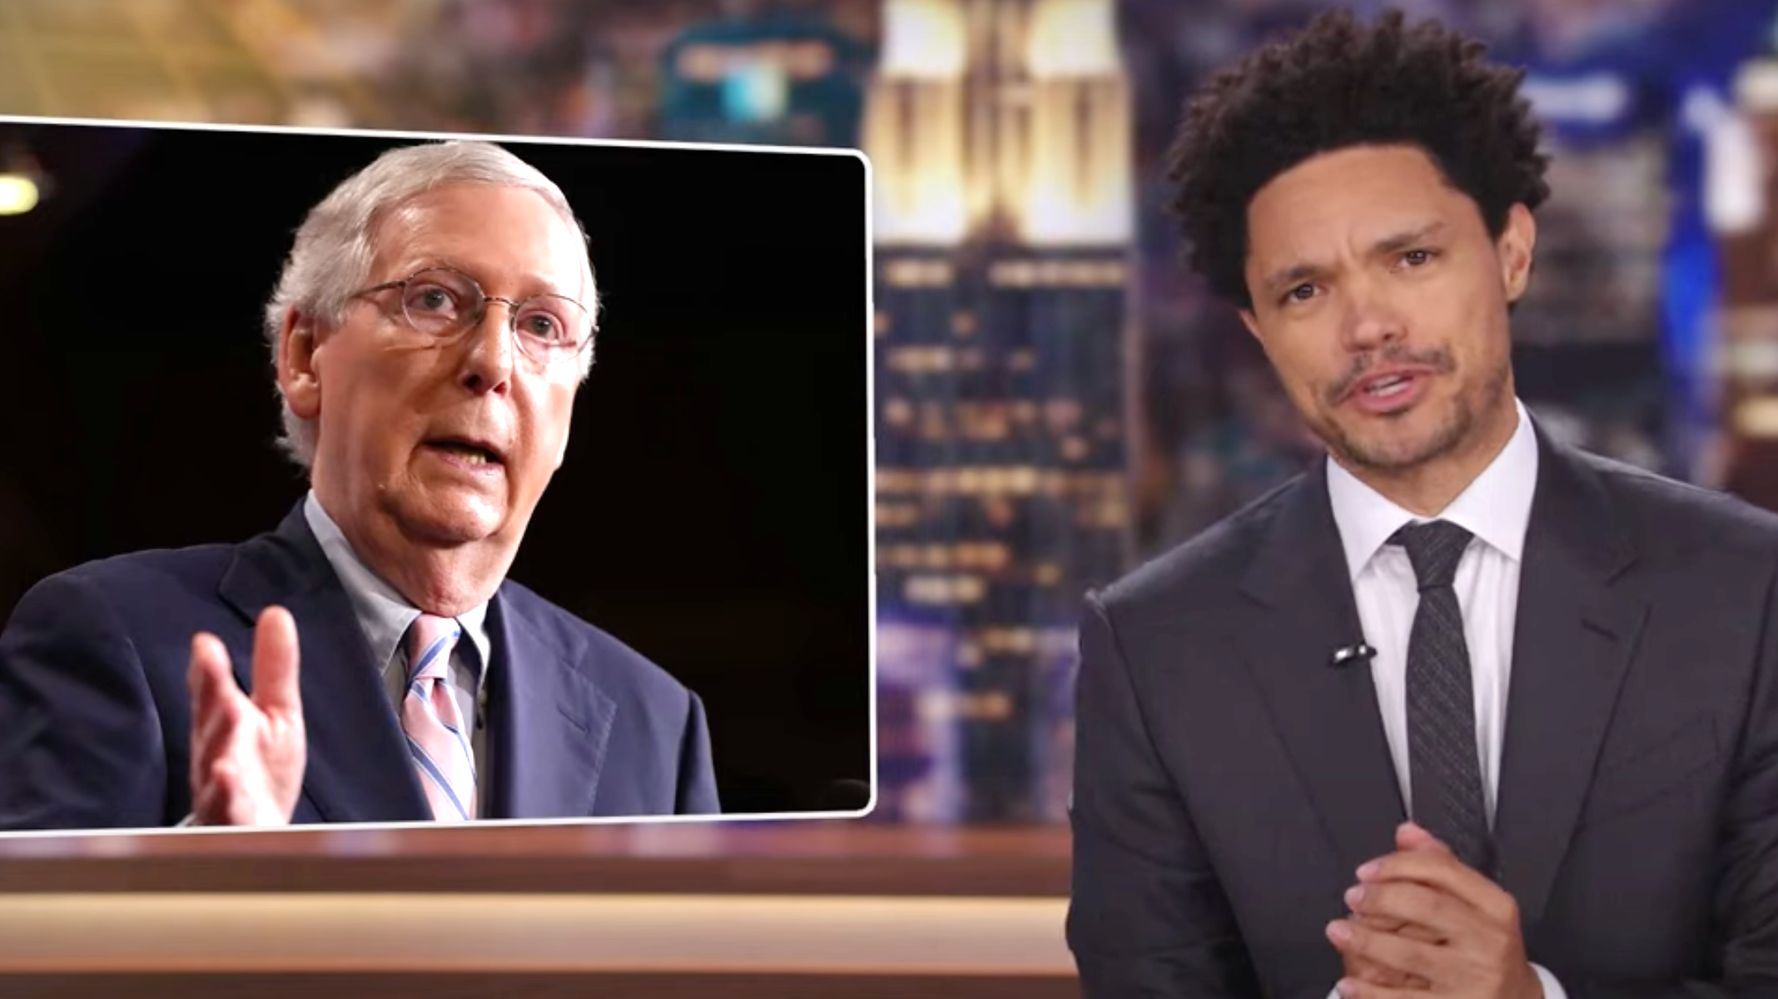 Trevor Noah Has A Blunt Observation About What Really Matters To Americans